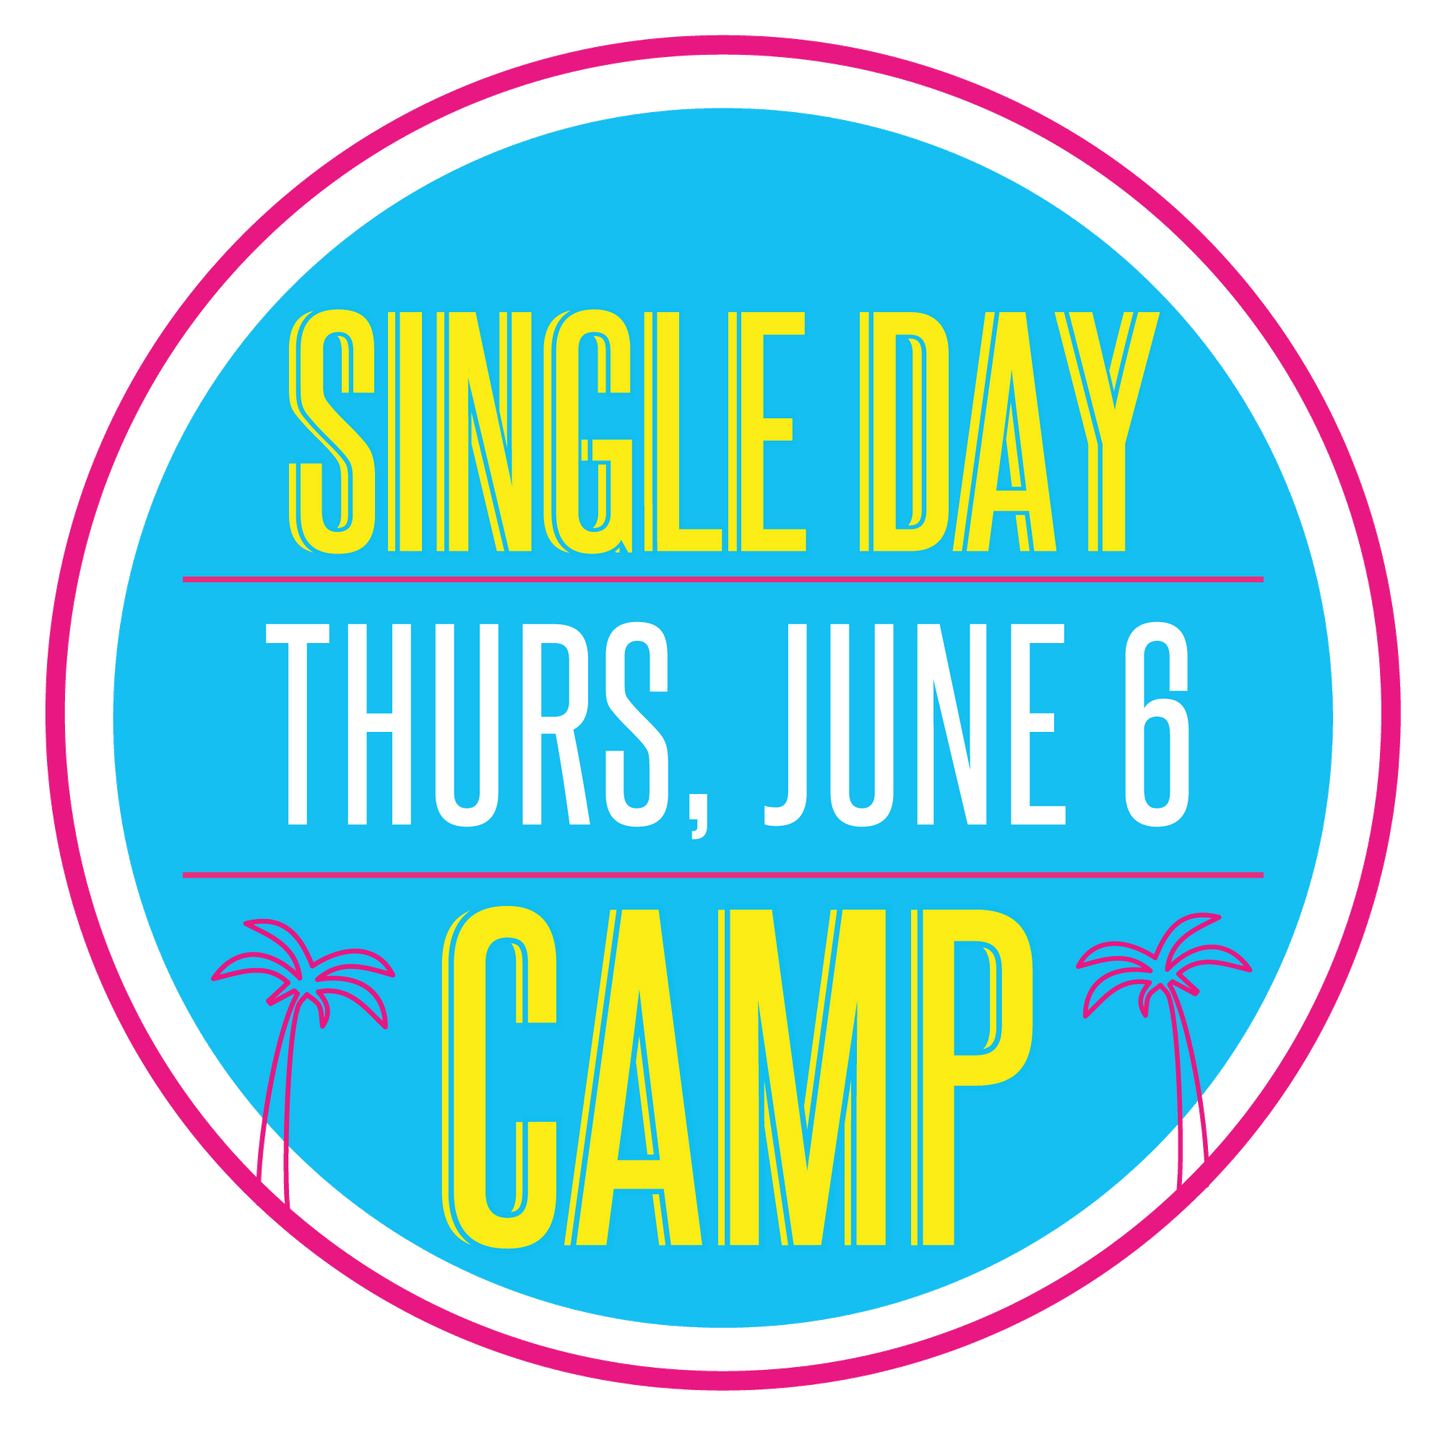 Single Day Sewing Workshop: Thursday, June 6, 9am-3pm